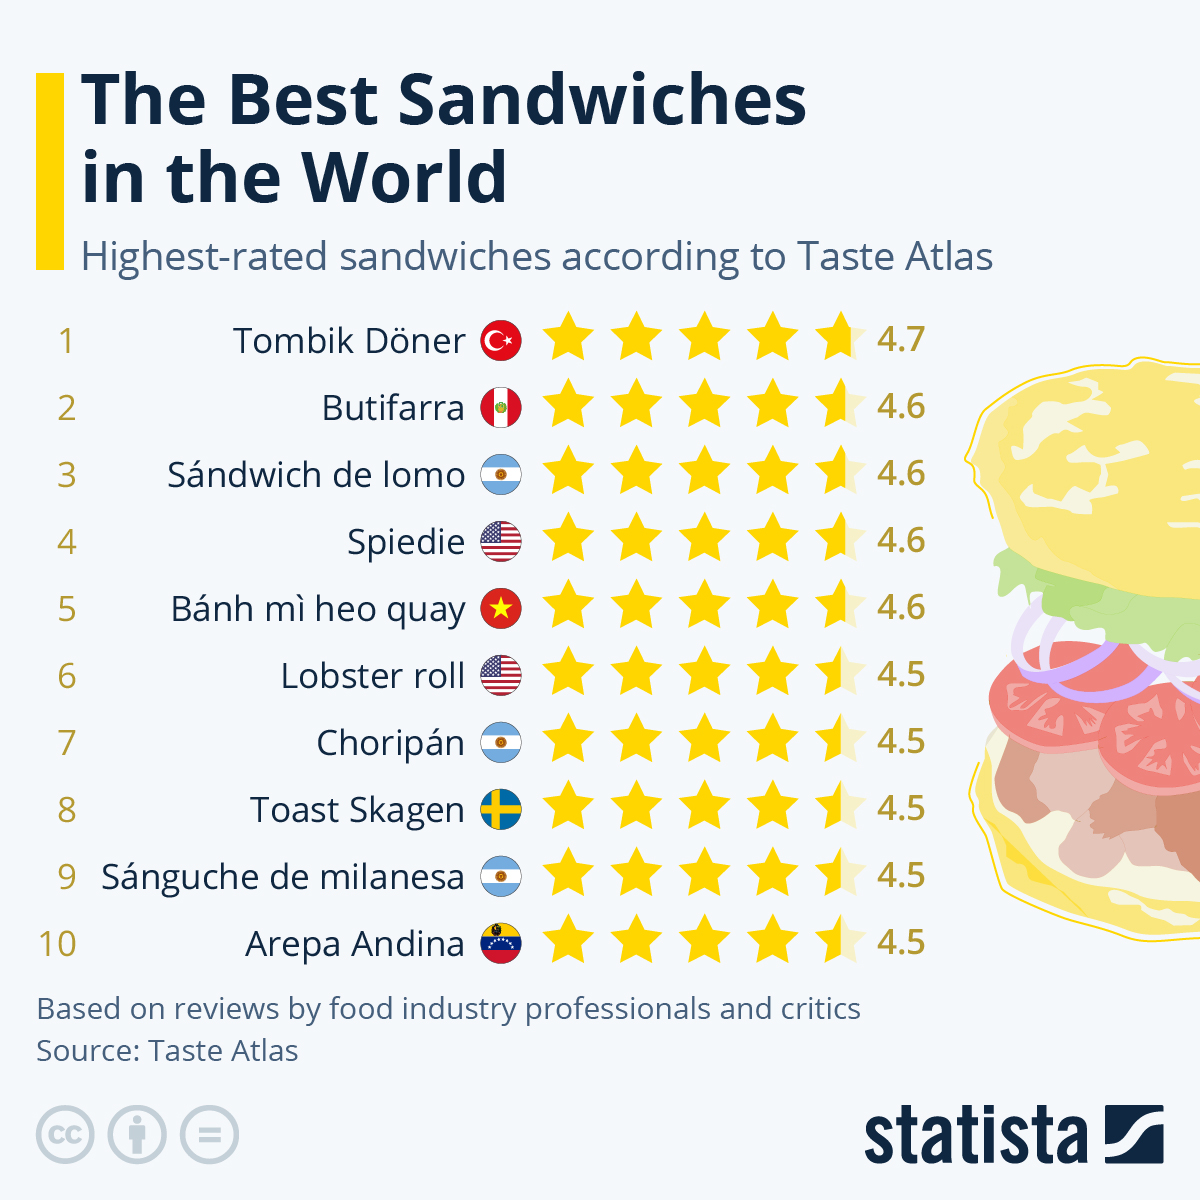 The Top Rated Sandwiches in the World